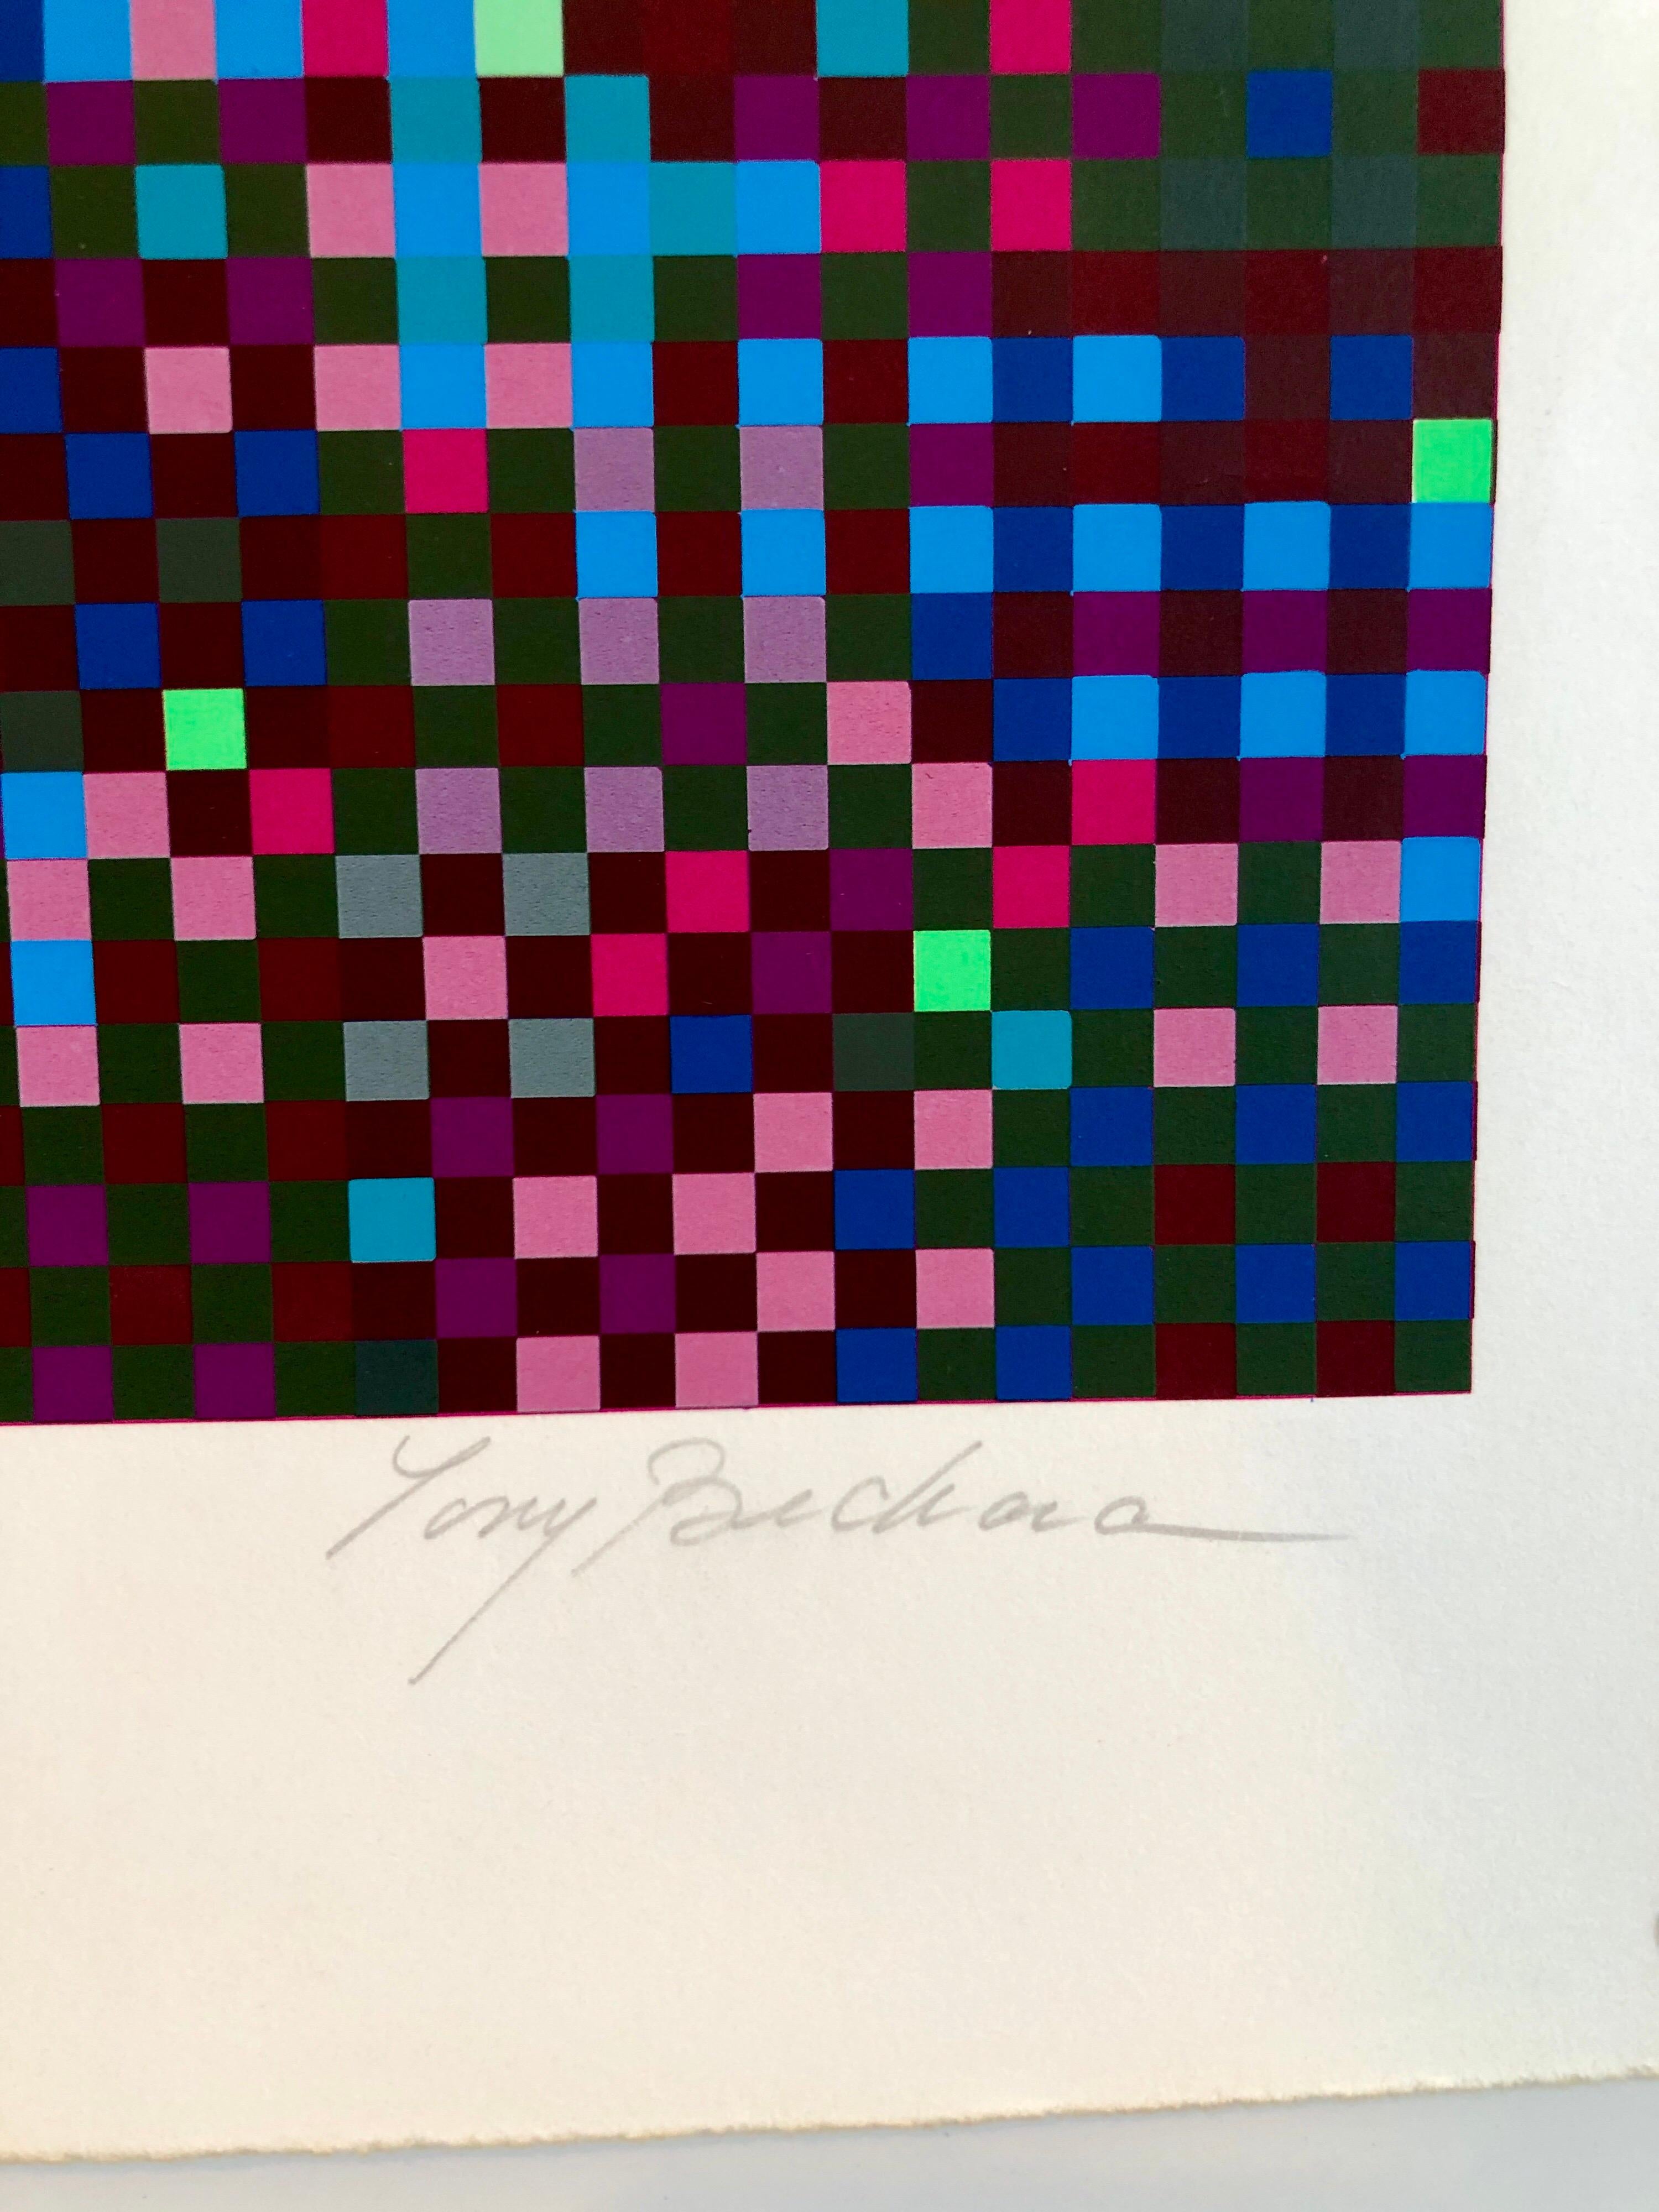 Color Grid. Ziggurat form. Hand signed and numbered silkscreen.
Tony Bechara, Artist born in Puerto Rico in 1942. Painter, printmaker. Bechara attended Georgetown University in Washington, D.C., and the School of Jurisprudence and Diplomacy at that